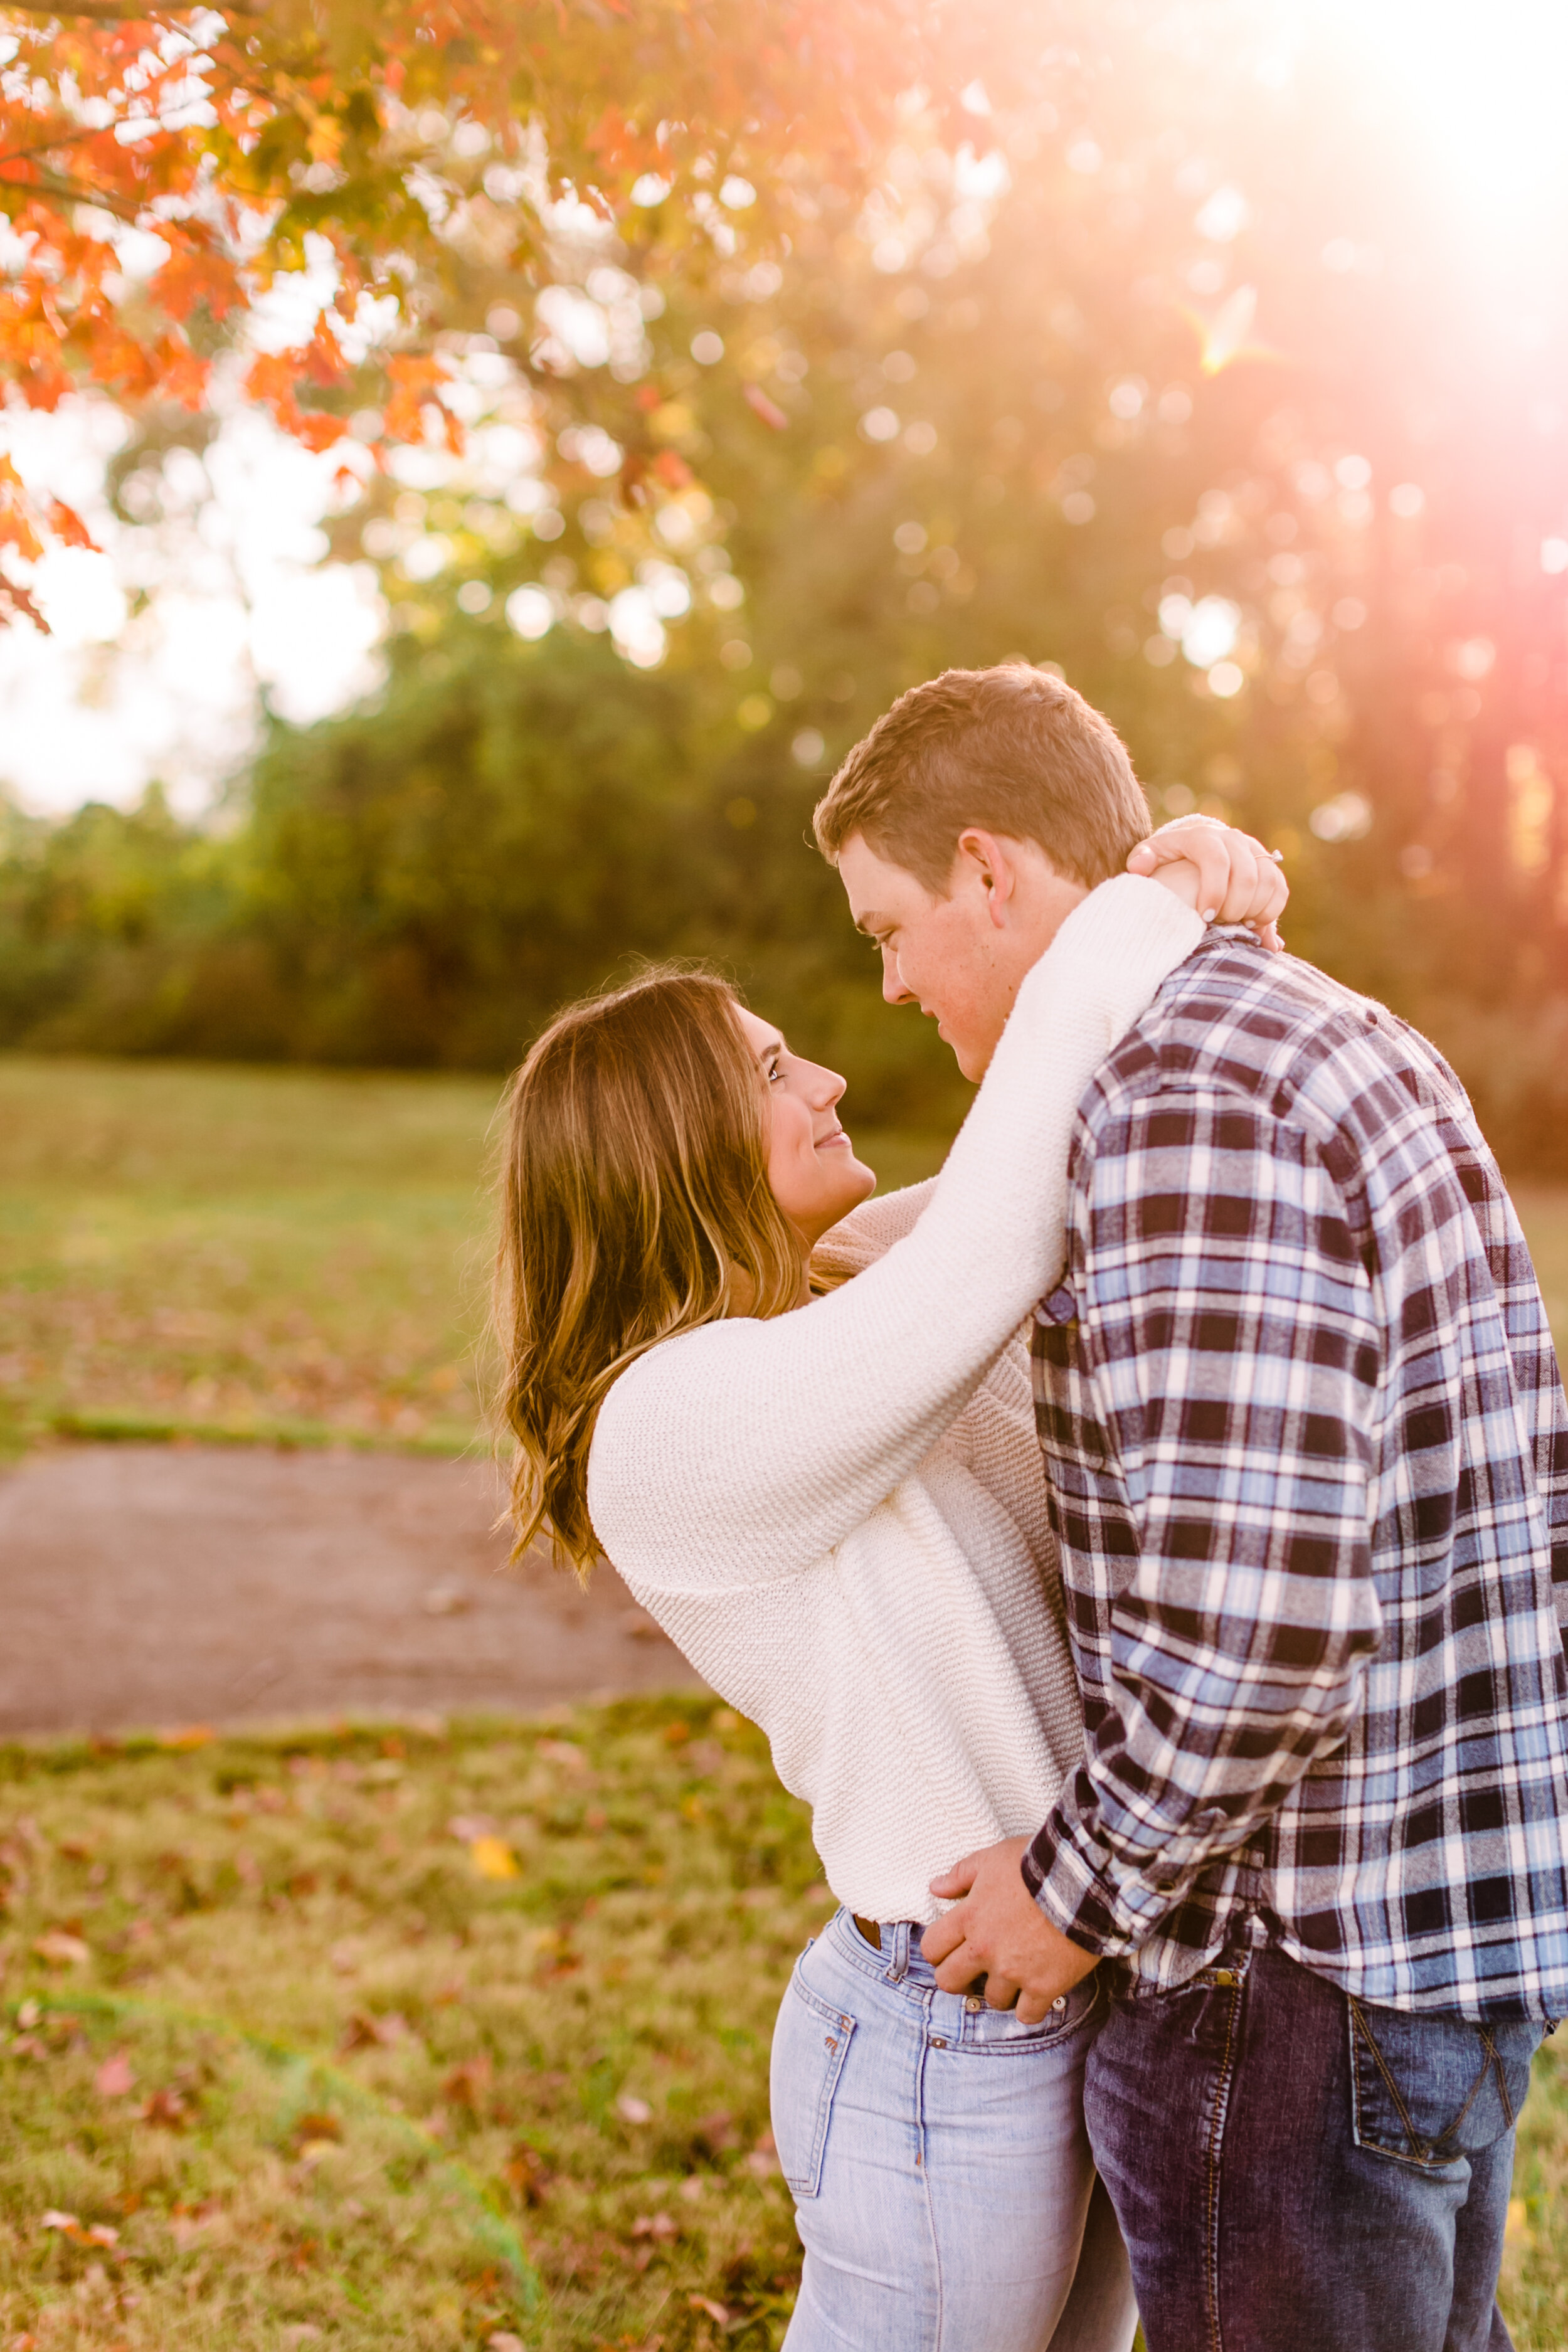 Tennessee+Fall+Engagement+Photos+Puppy (9 of 63).jpg